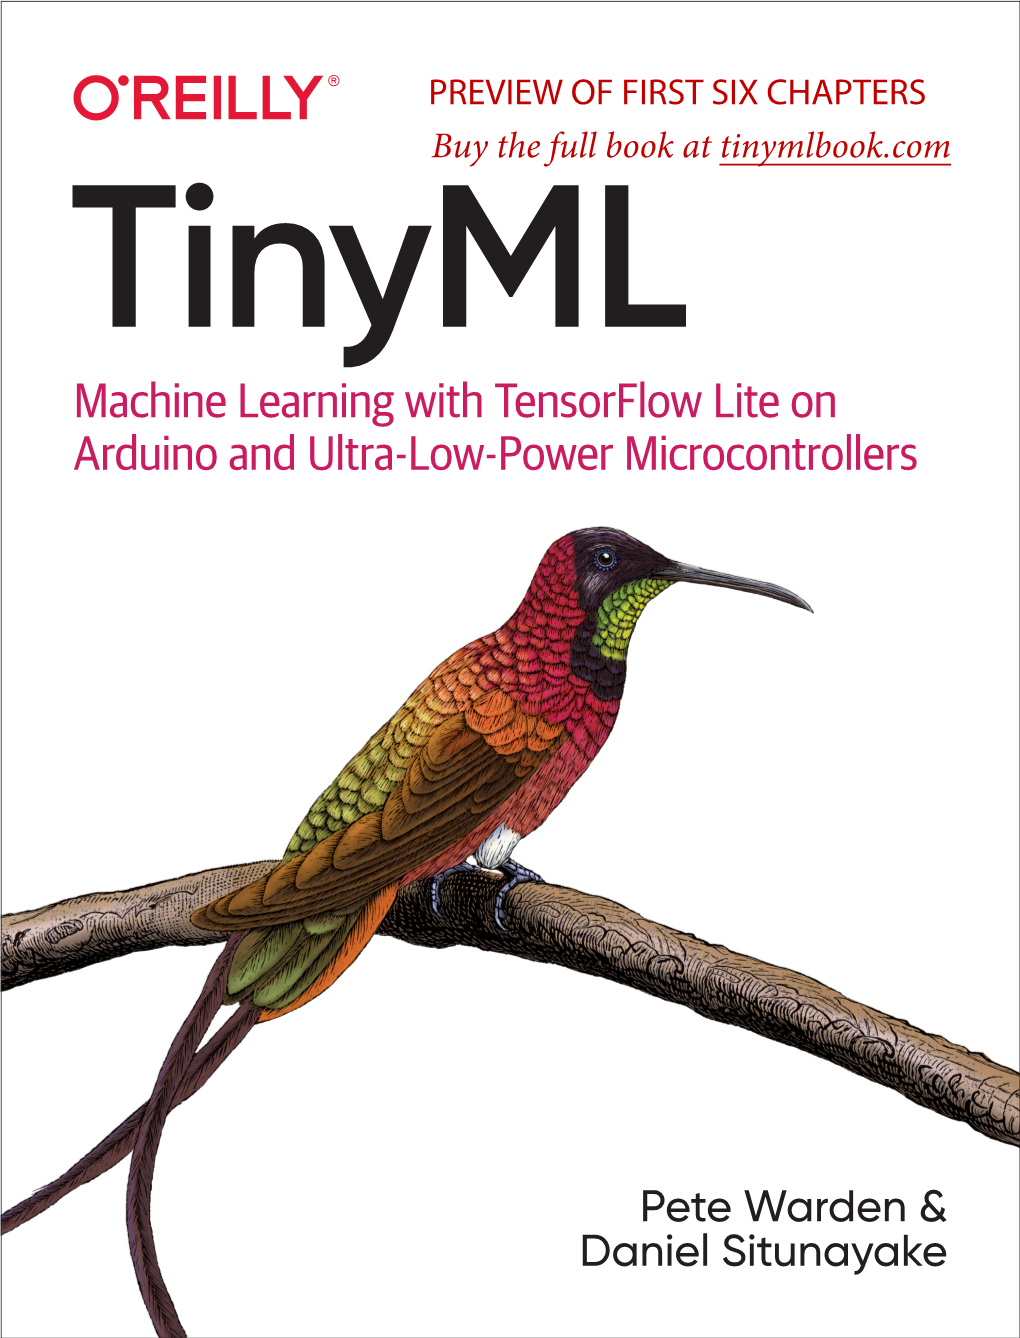 Machine Learning with Tensorflow Lite on Arduino and Ultra-Low-Power Microcontrollers